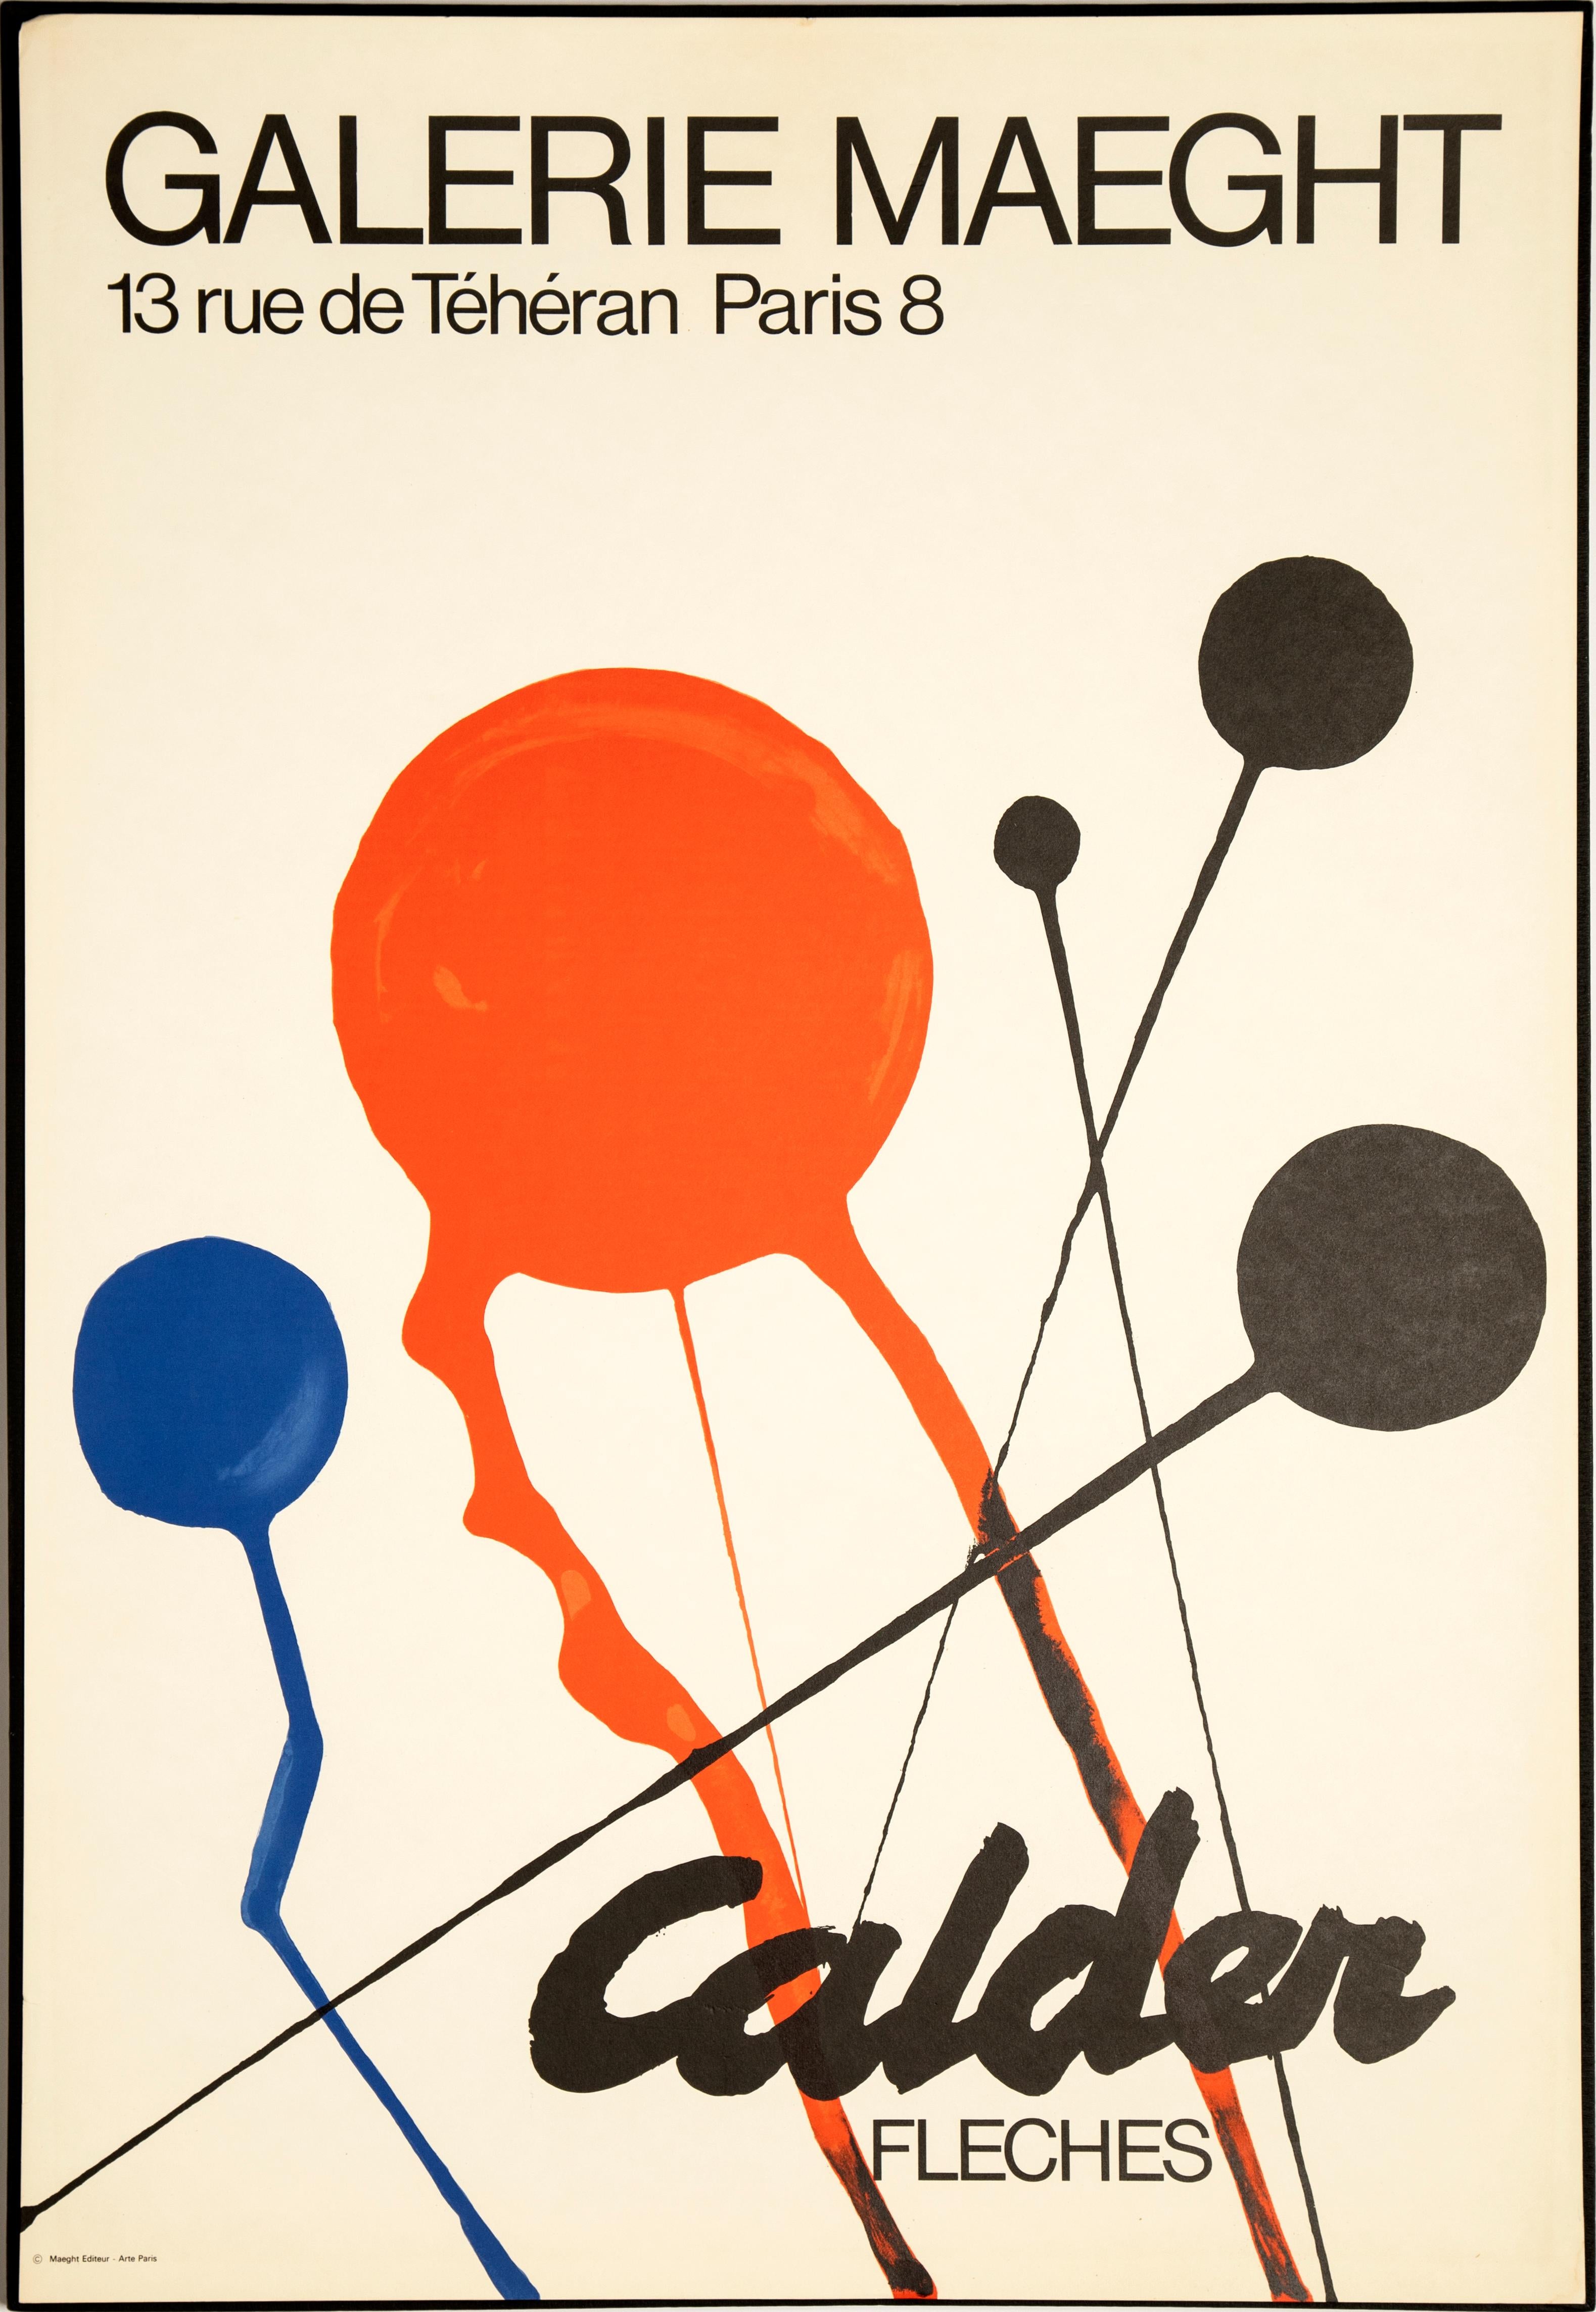 Kinetic Alexander Calder - Fleches 'Galerie Maeght', 1970 - Lithographic Poster For Sale